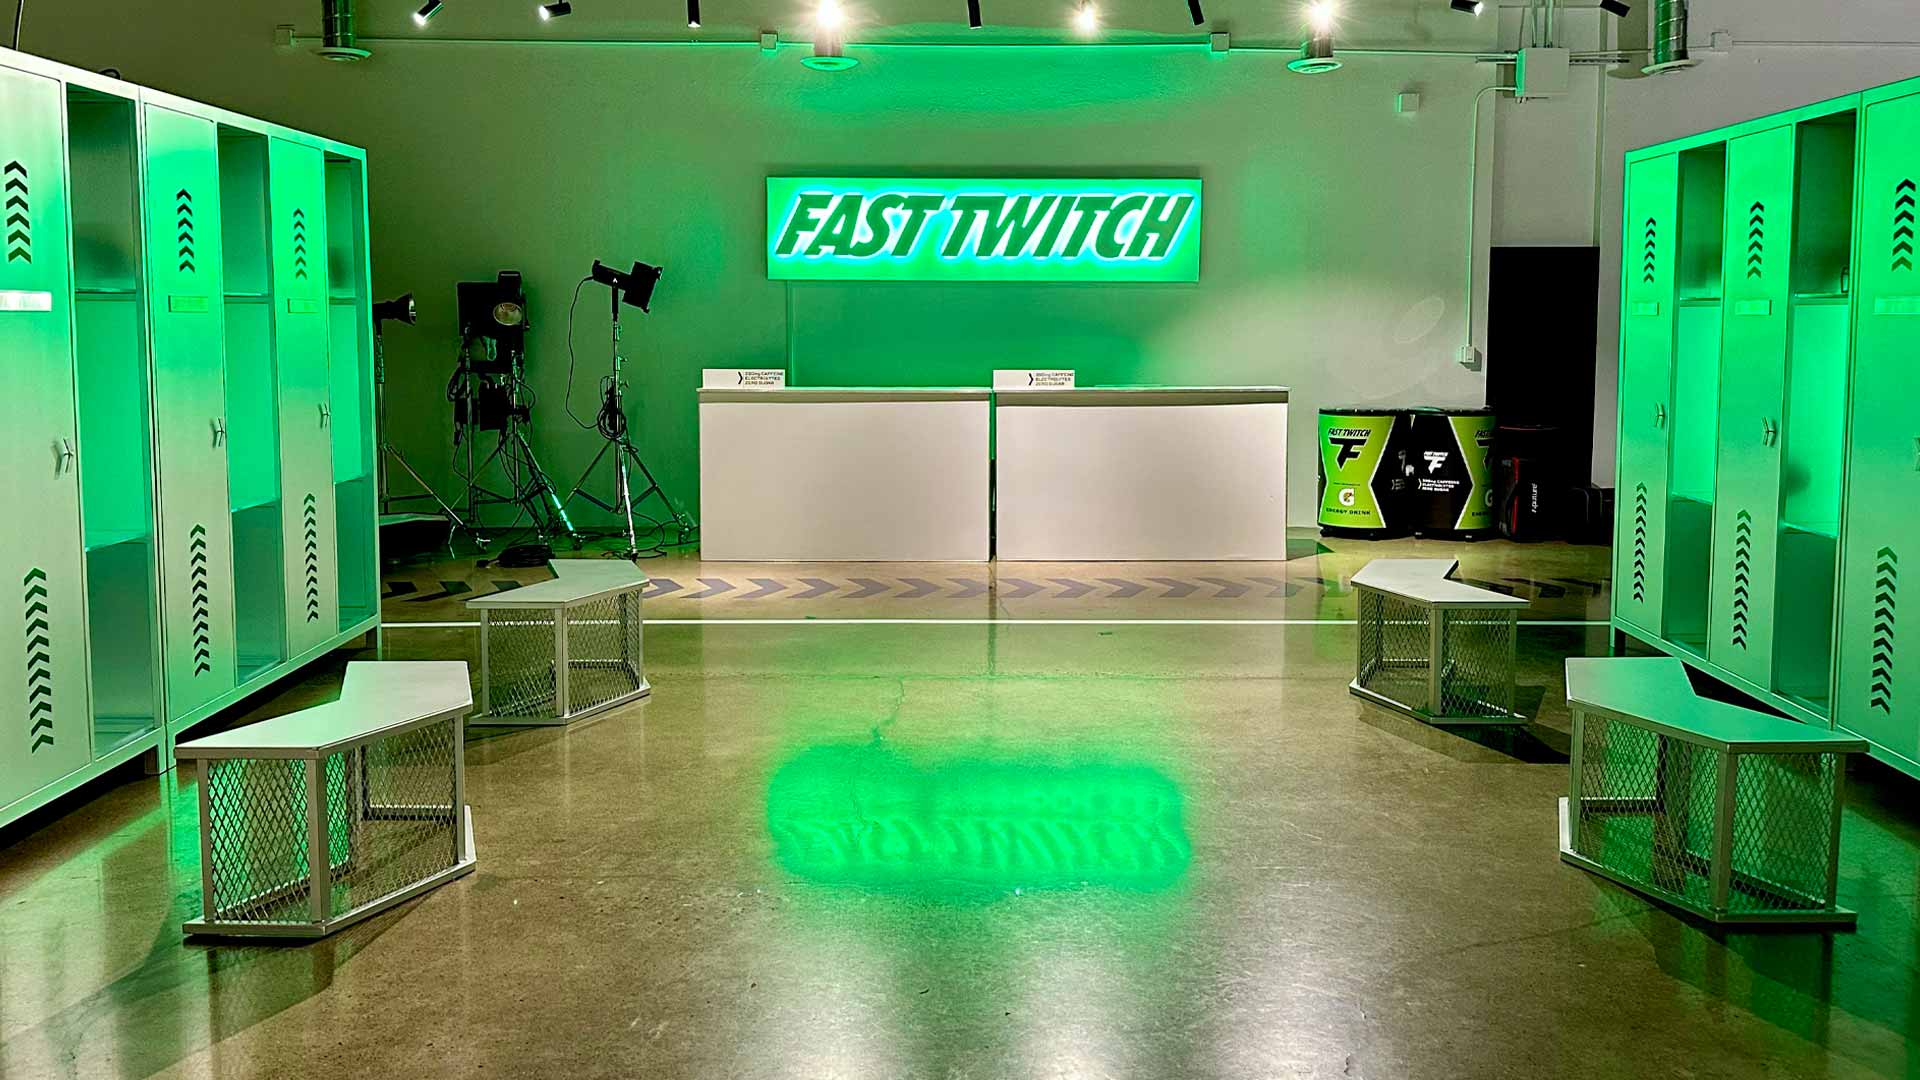 Locker room bathed in green light with Fast Twitch sign.